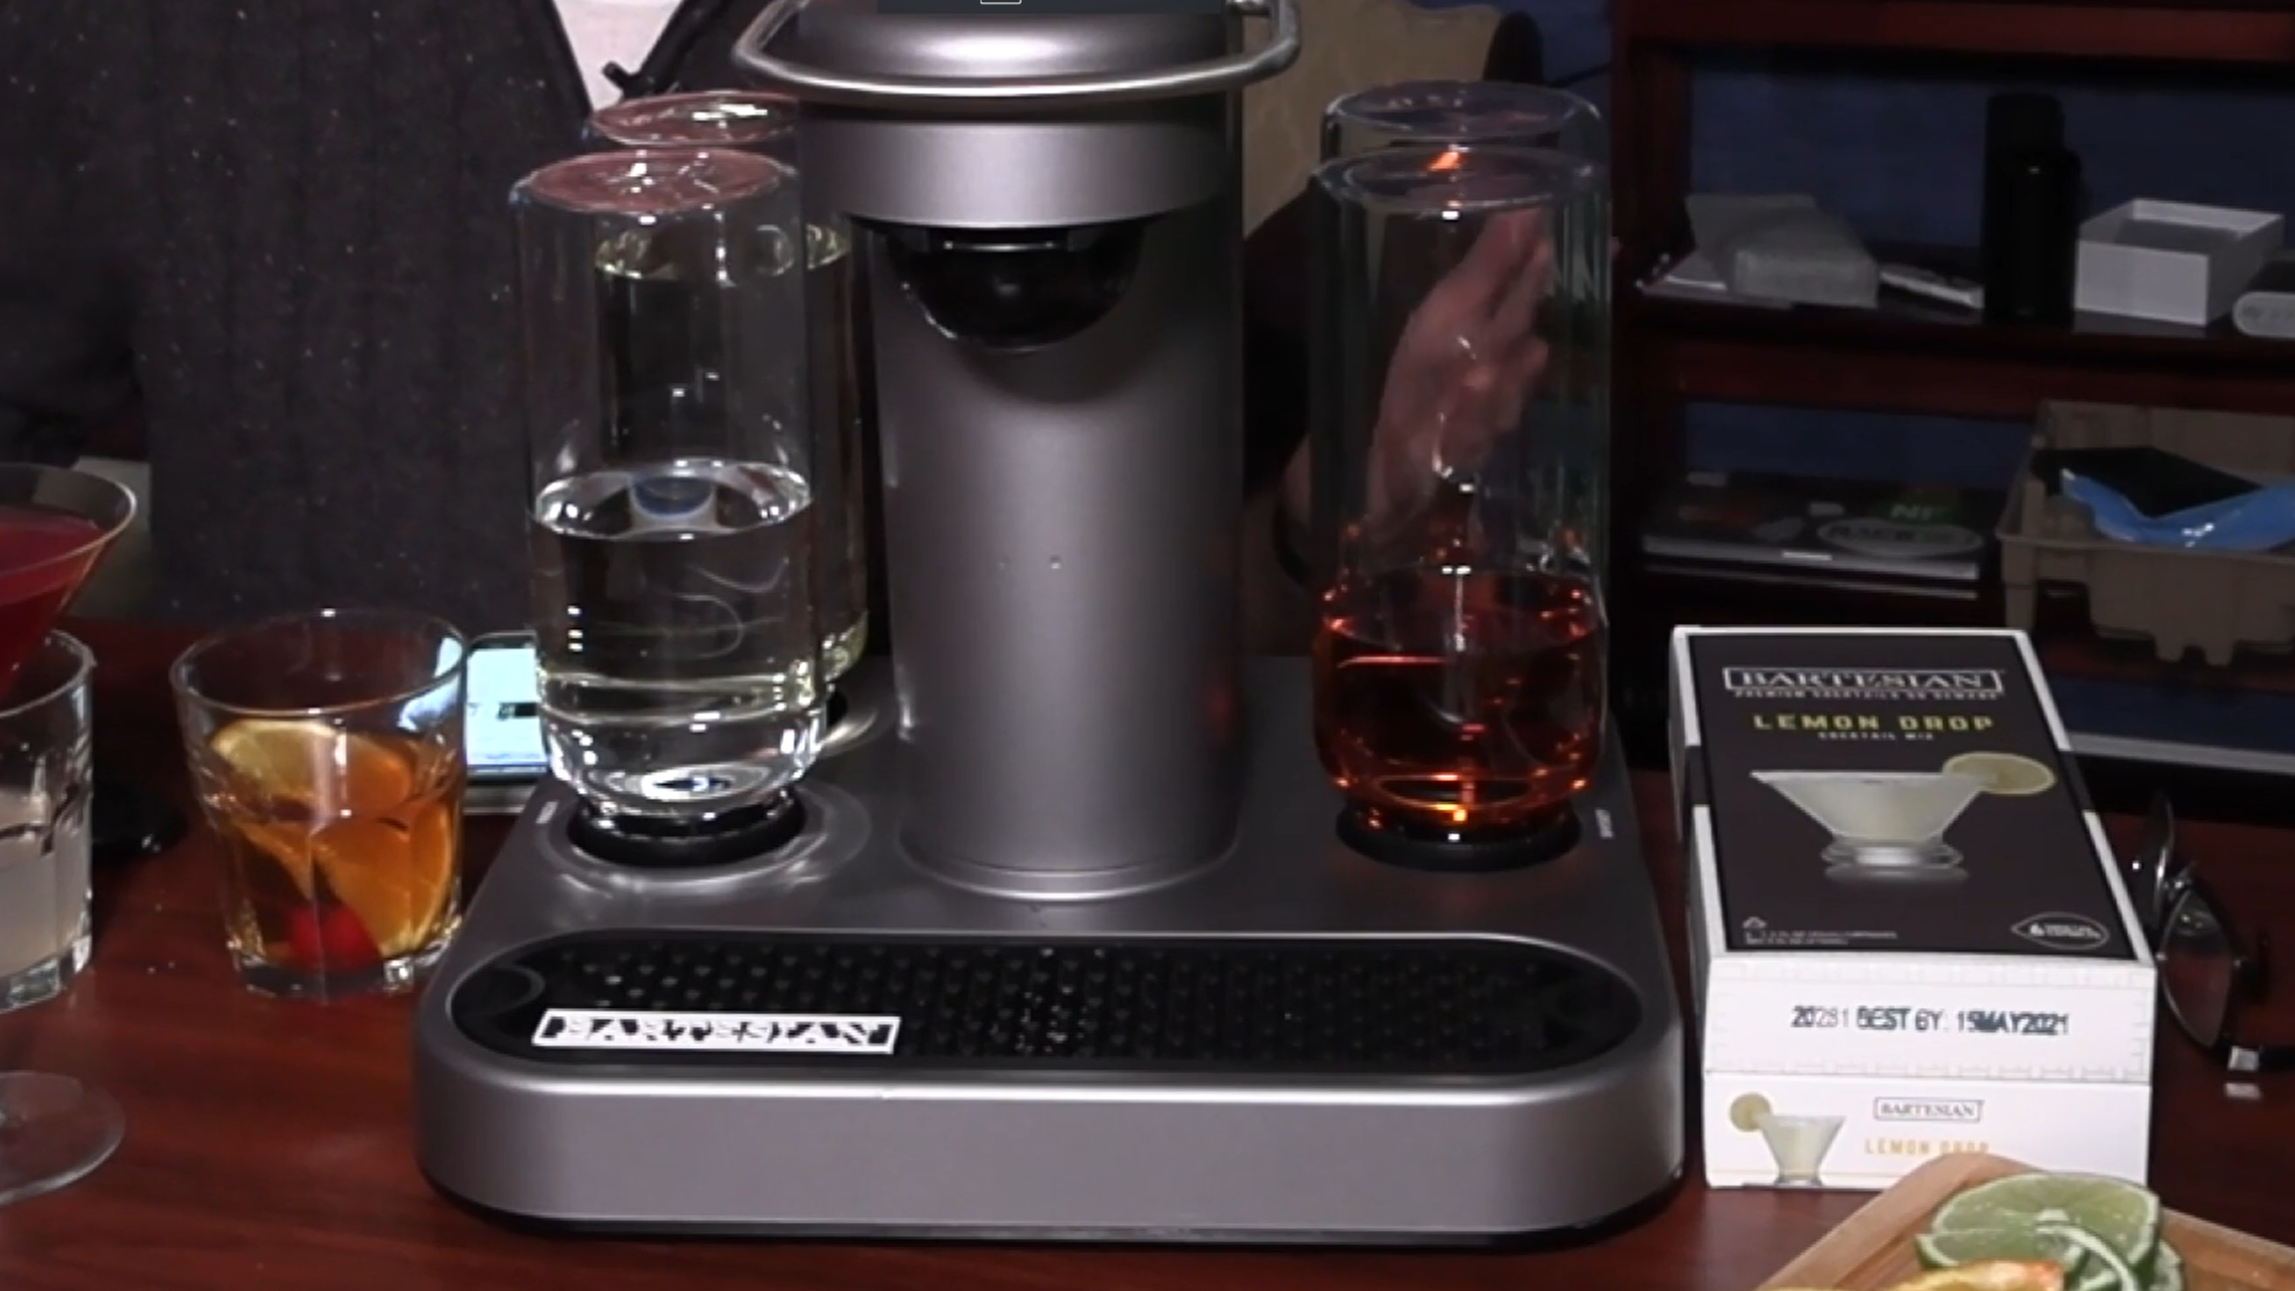 What the Tech Father's Day gift: Robot bartender